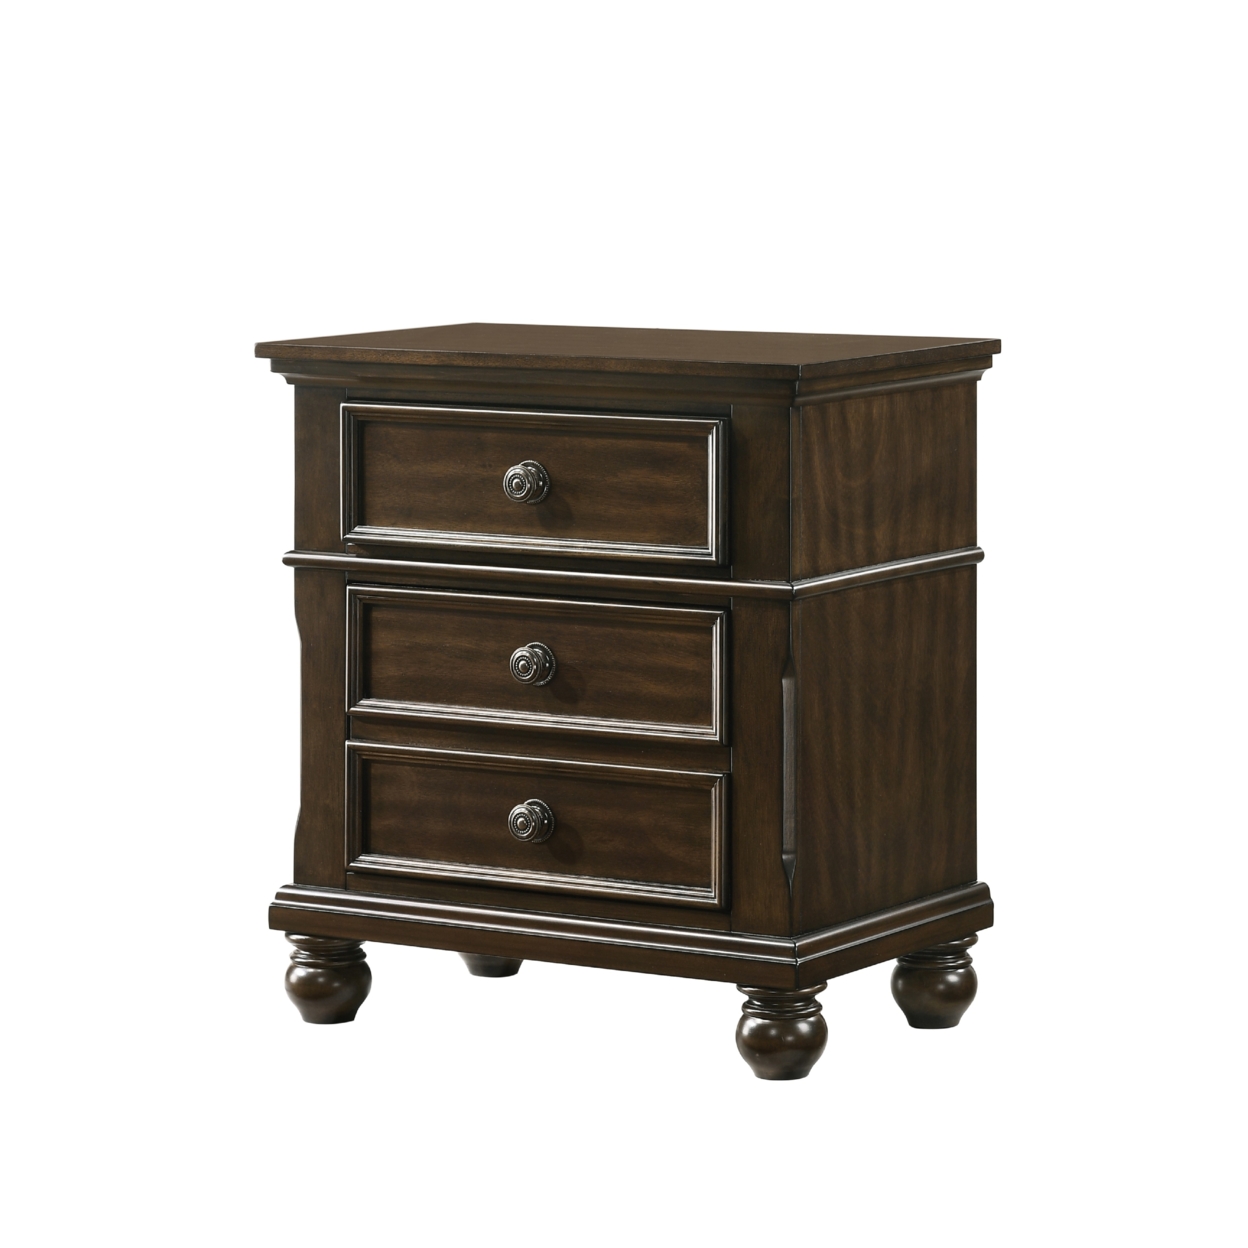 3 Drawer Wooden Nightstand With Molded Details And Metal Knobs, Brown- Saltoro Sherpi